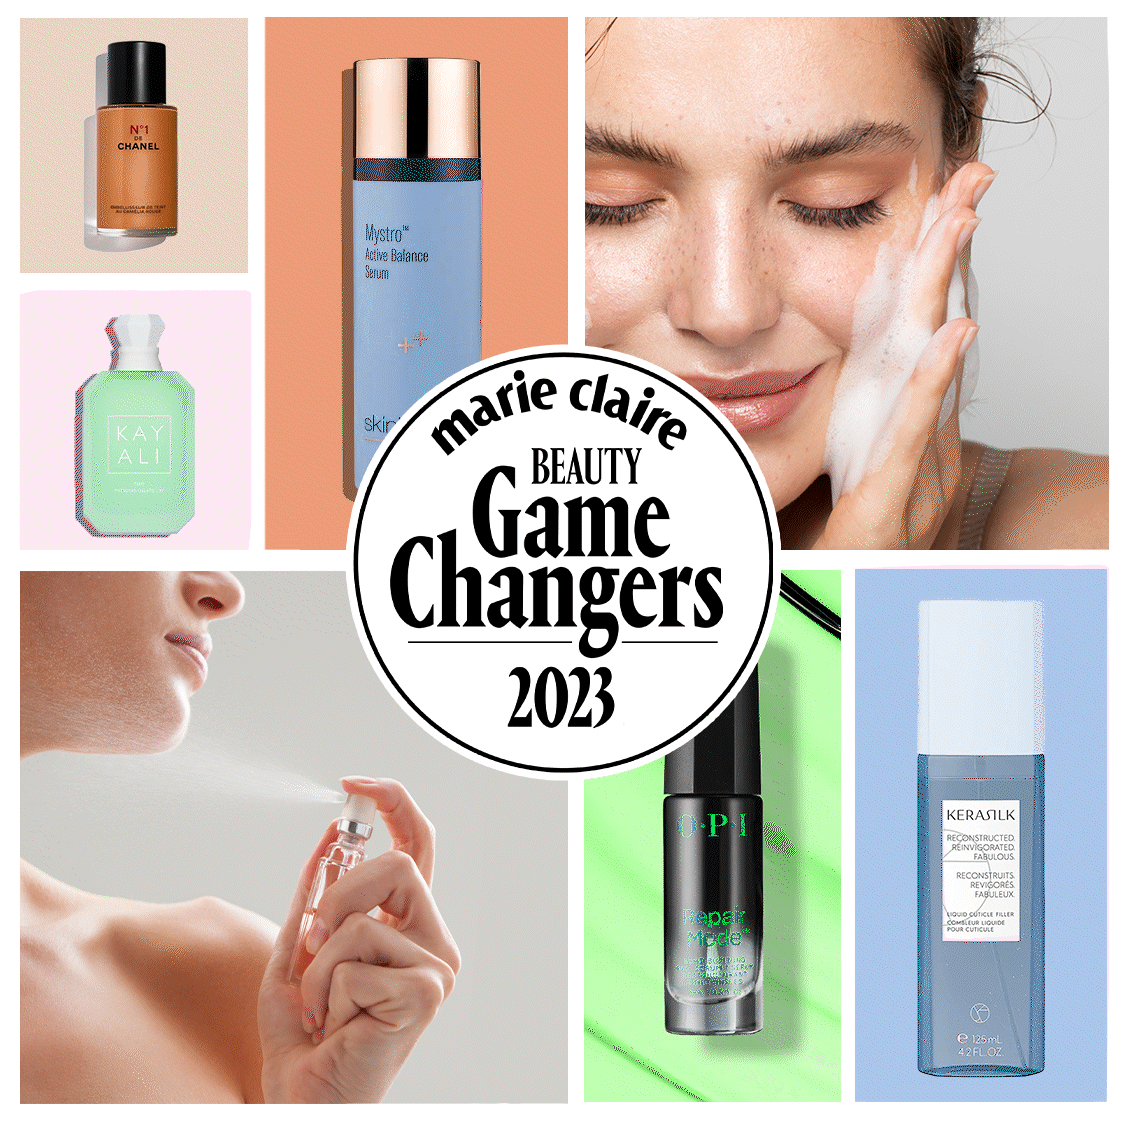 The Winners of Marie Claire's 2023 Beauty Game-Changers Awards